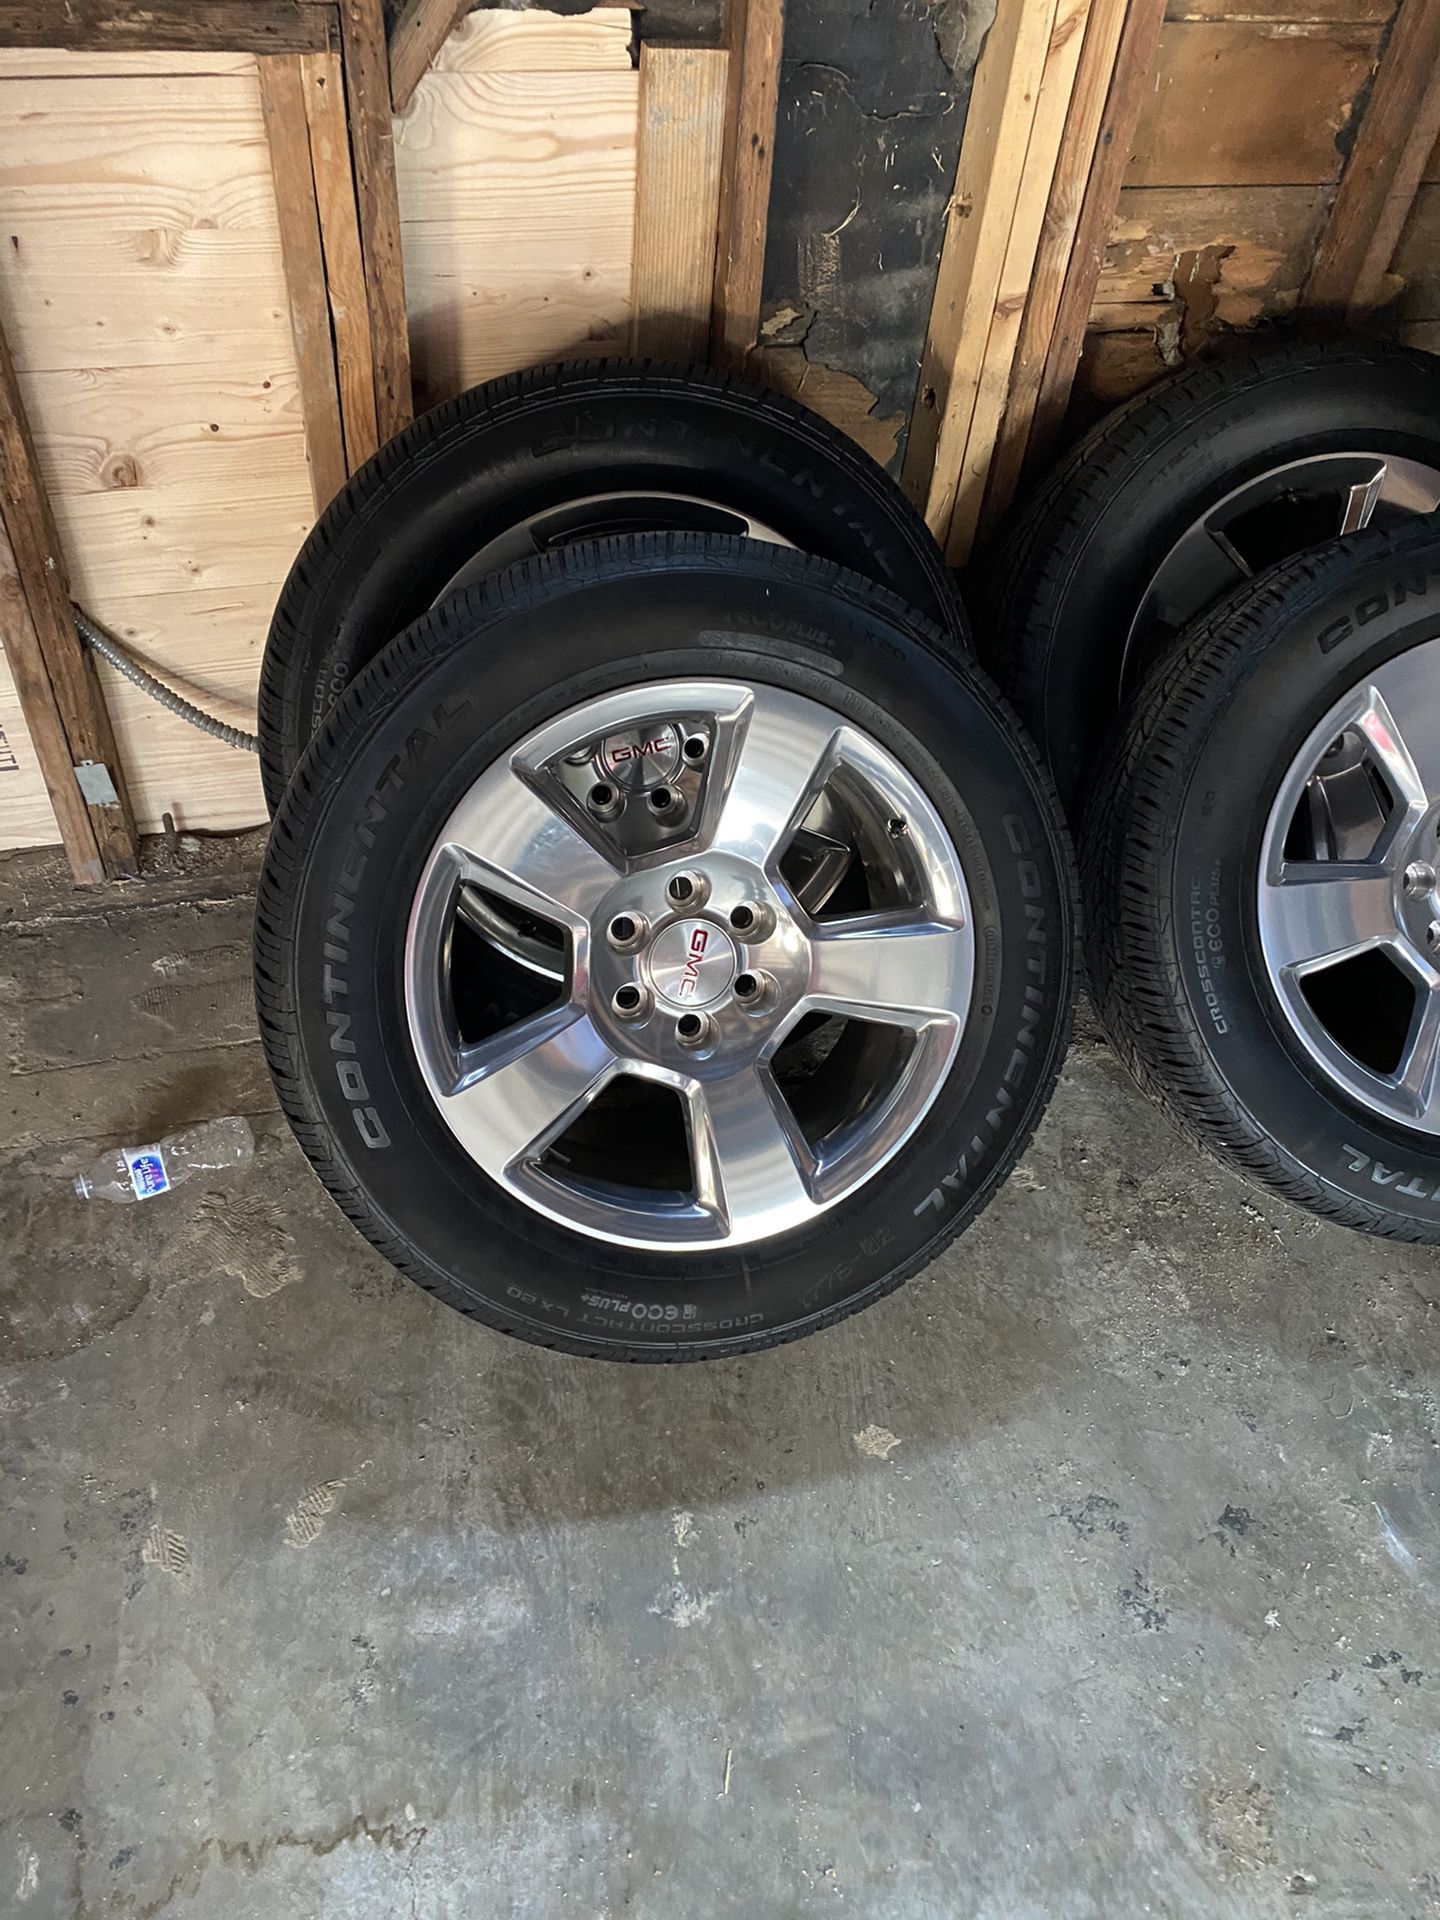 Gmc tires and rims